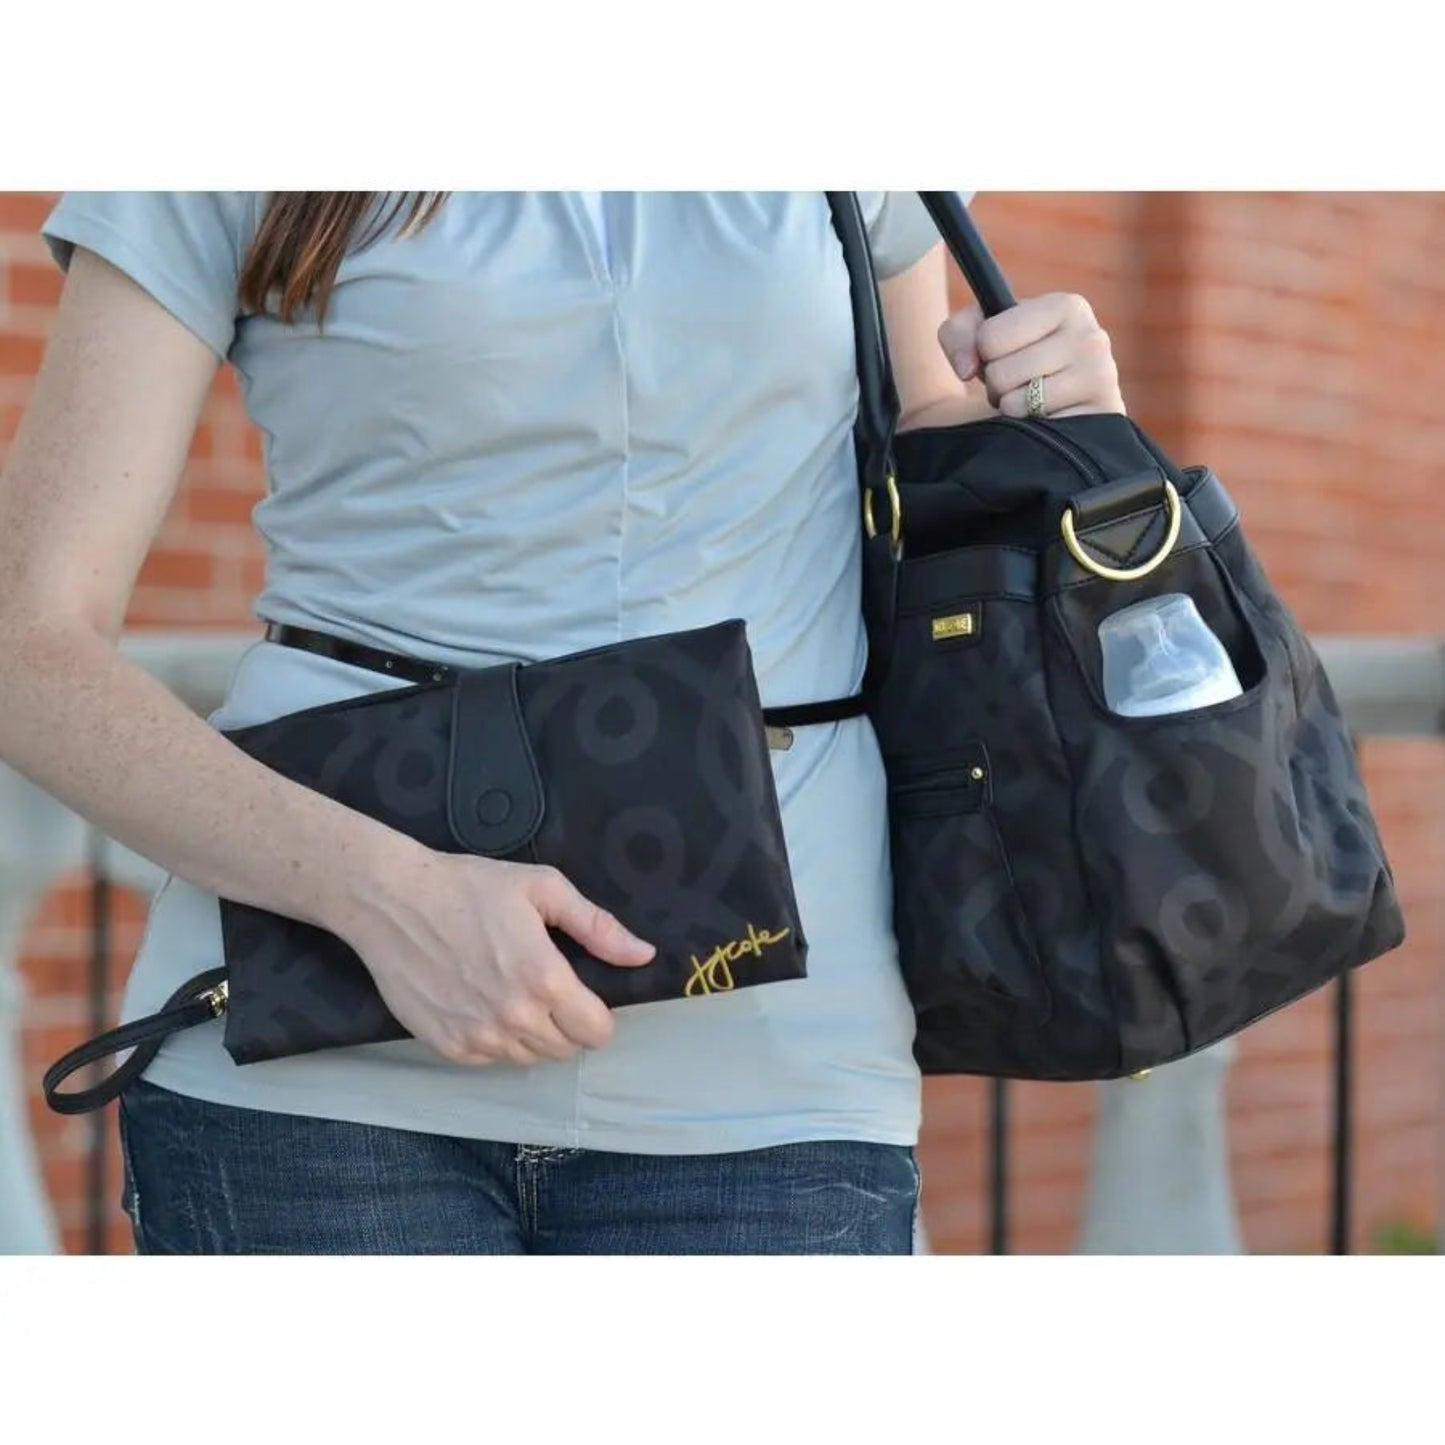 Nappy Bags JJ Cole Clutch - Best Nappy Changing Clutch for Baby - Black and Gold JJ Cole 19.99